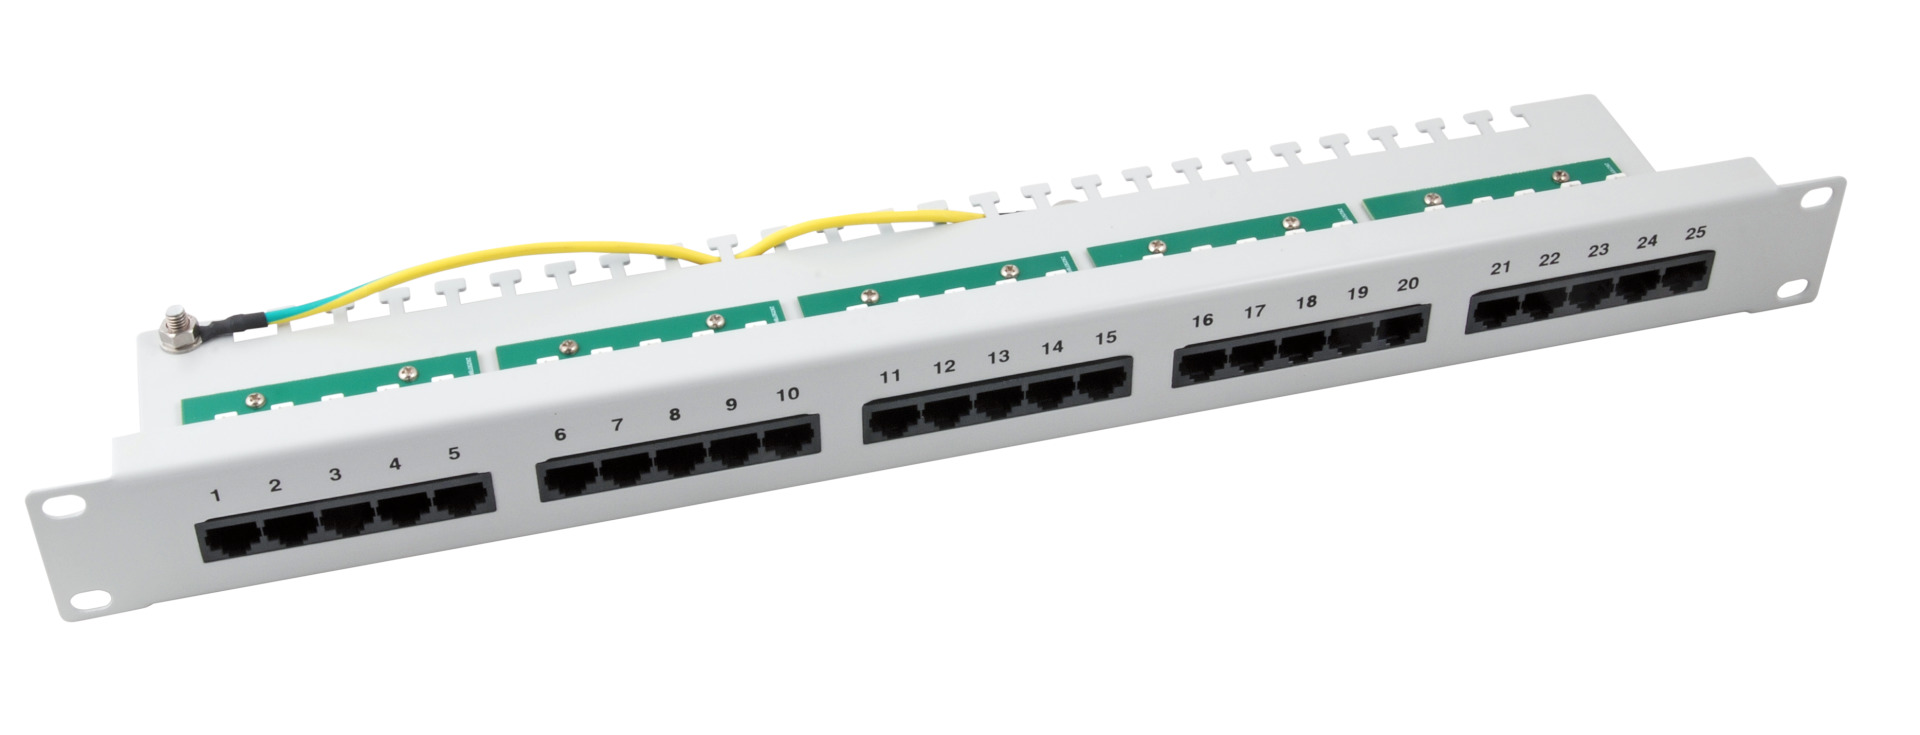 Patch Panel 25 x RJ45 8/4 1HE ISDN, RAL9005, Cat. 3